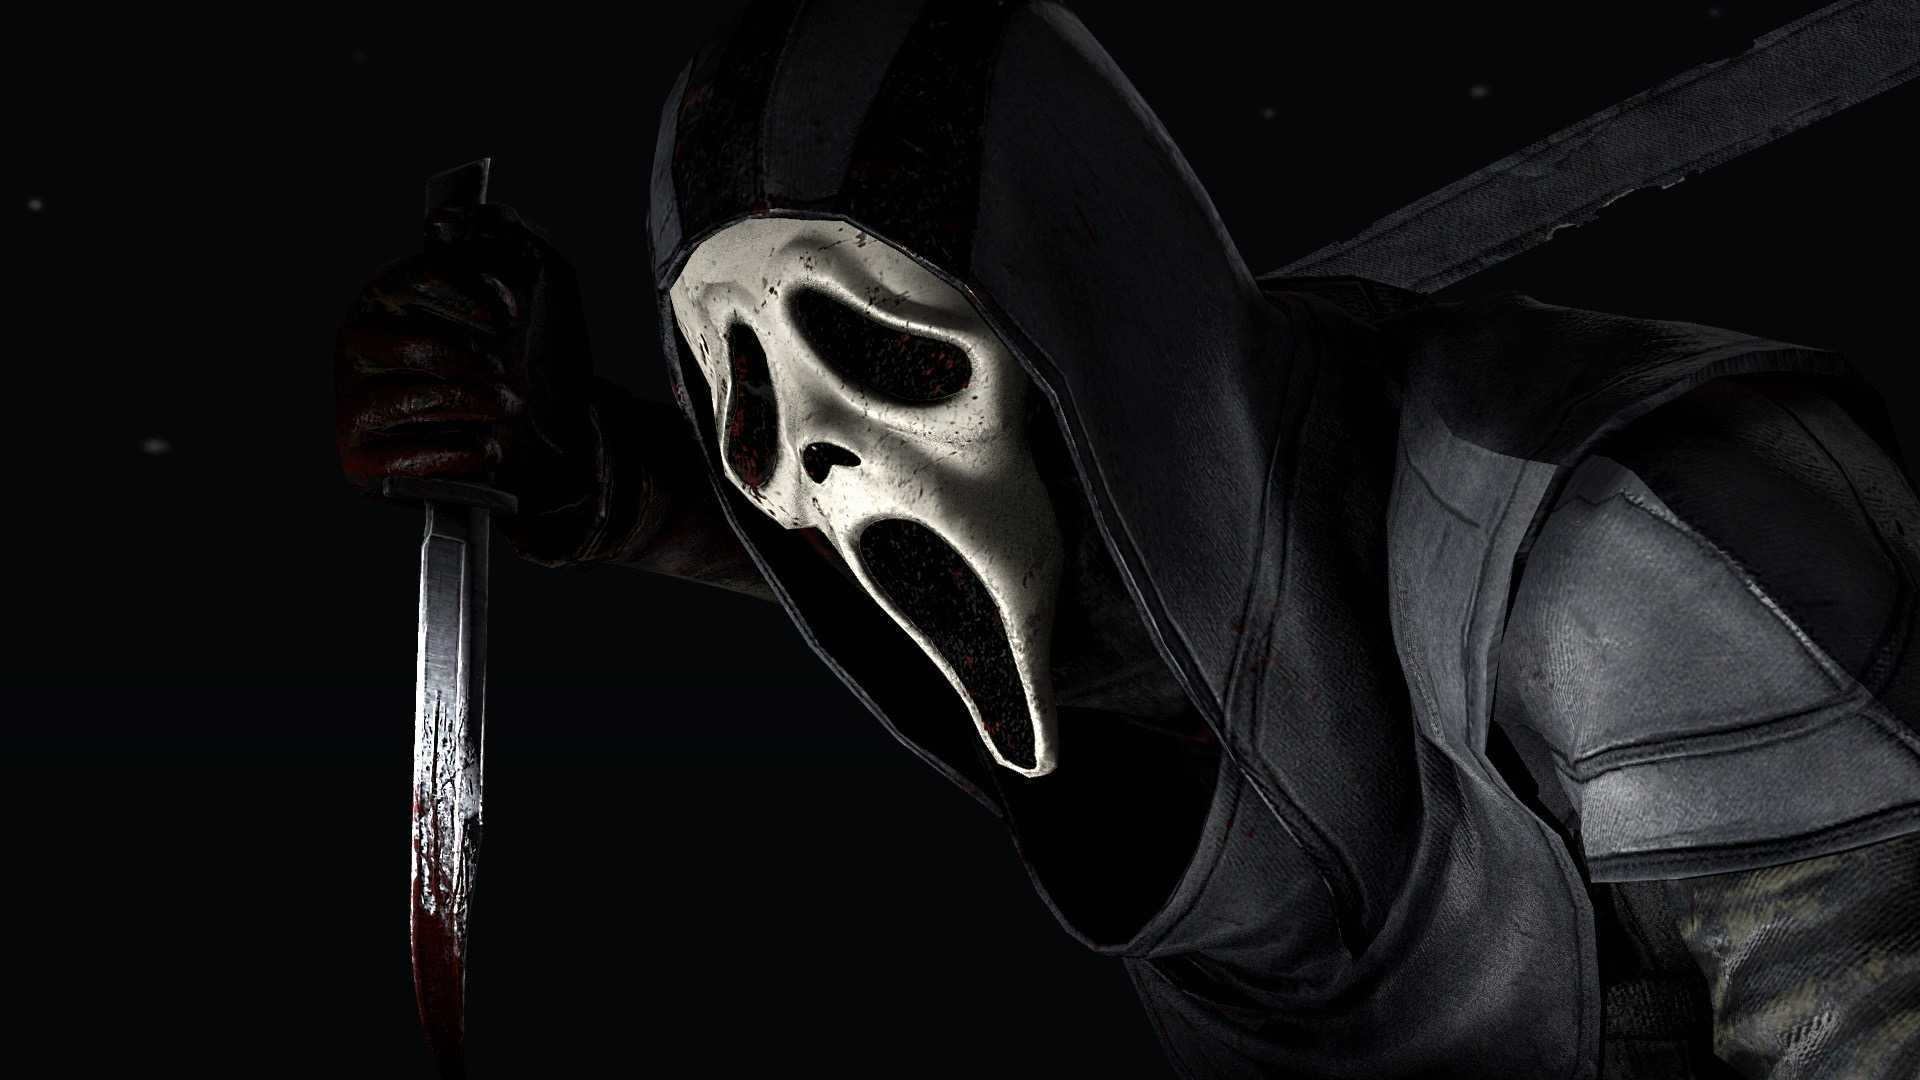 Scream 5: The release date, cast, trailer, and everything else you need to know - Ghostface